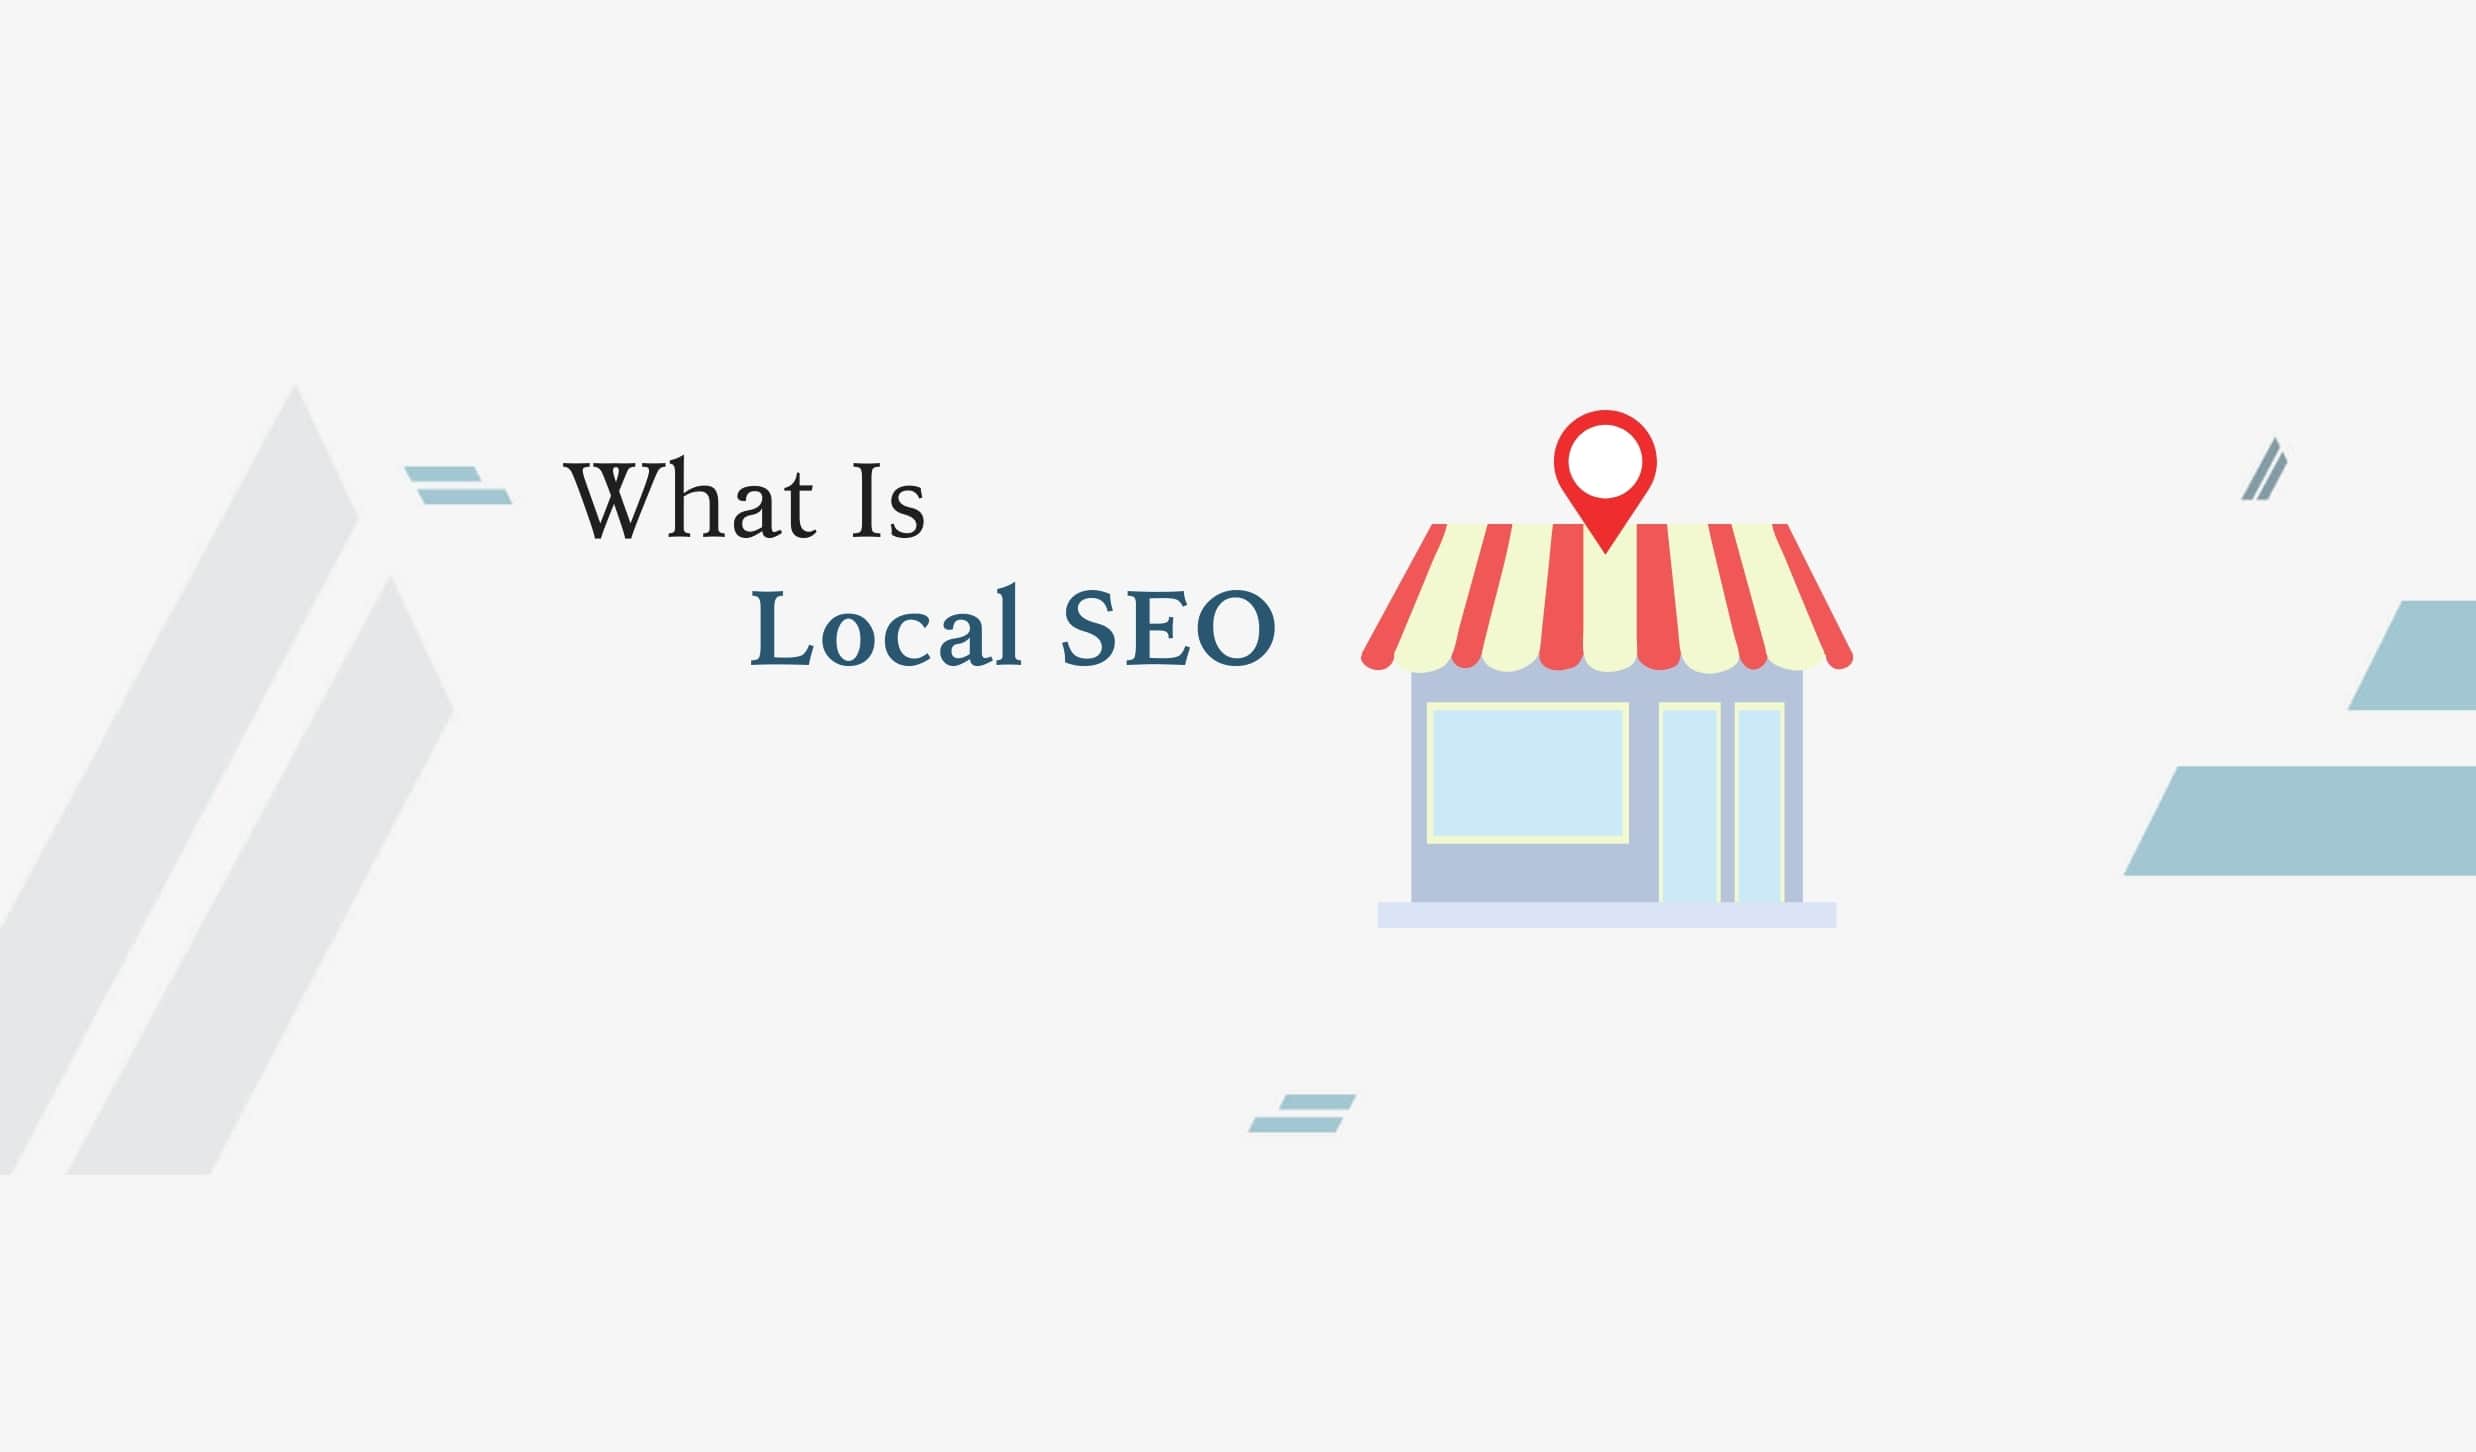 What is local seo?